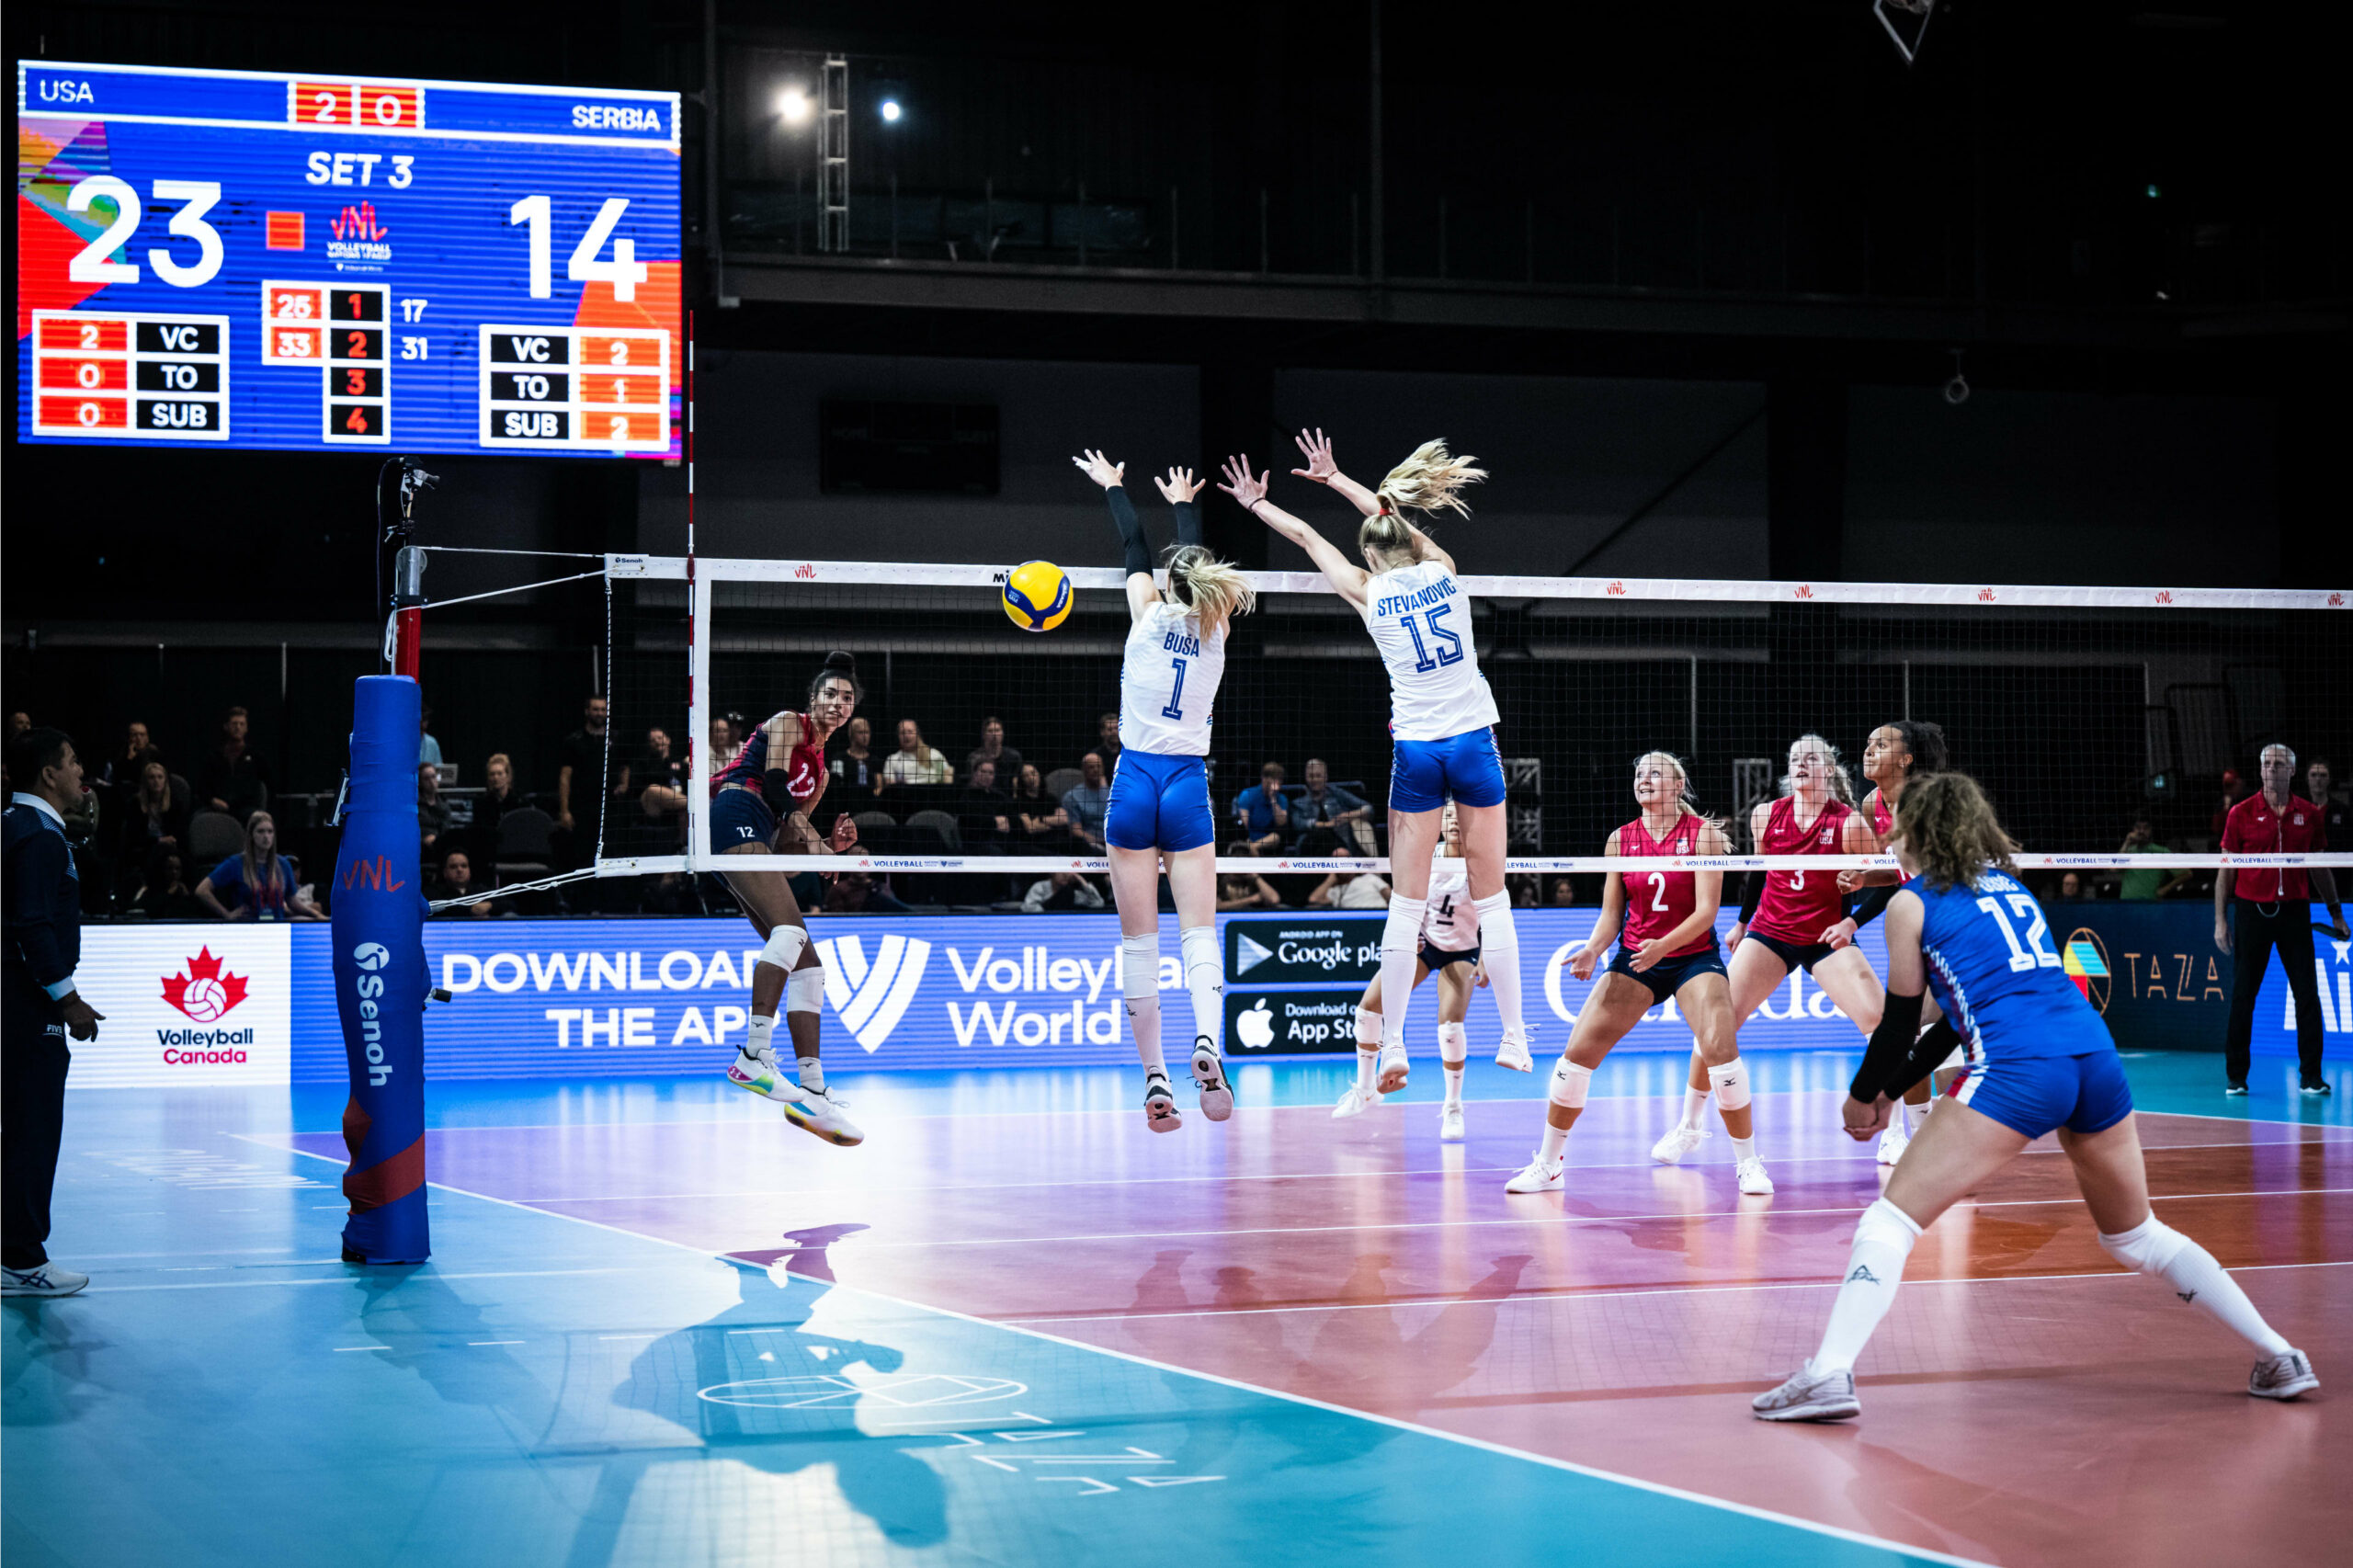 USA Women improve to 9-1 at VNL